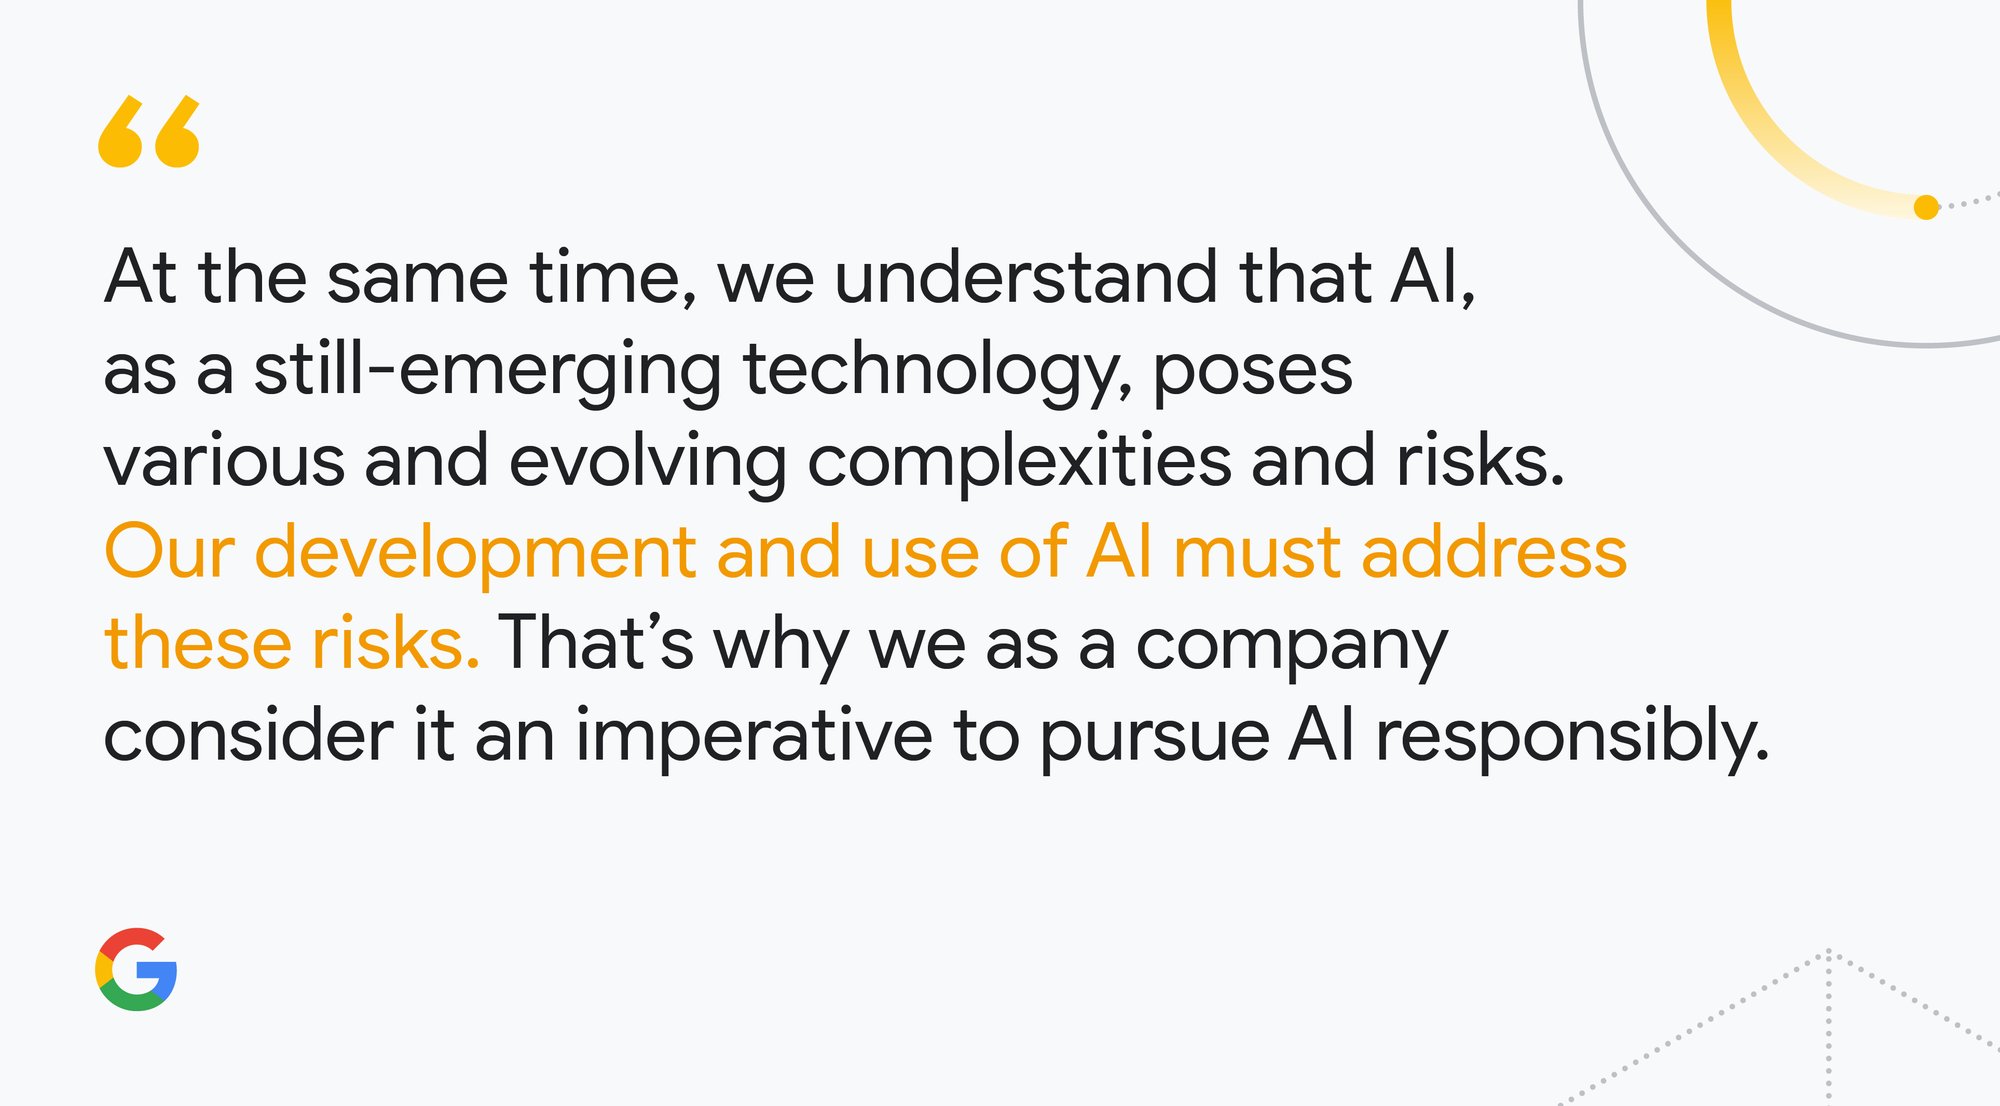 Italicized quotes expressing the need to develop AI responsibly and mitigate risks.